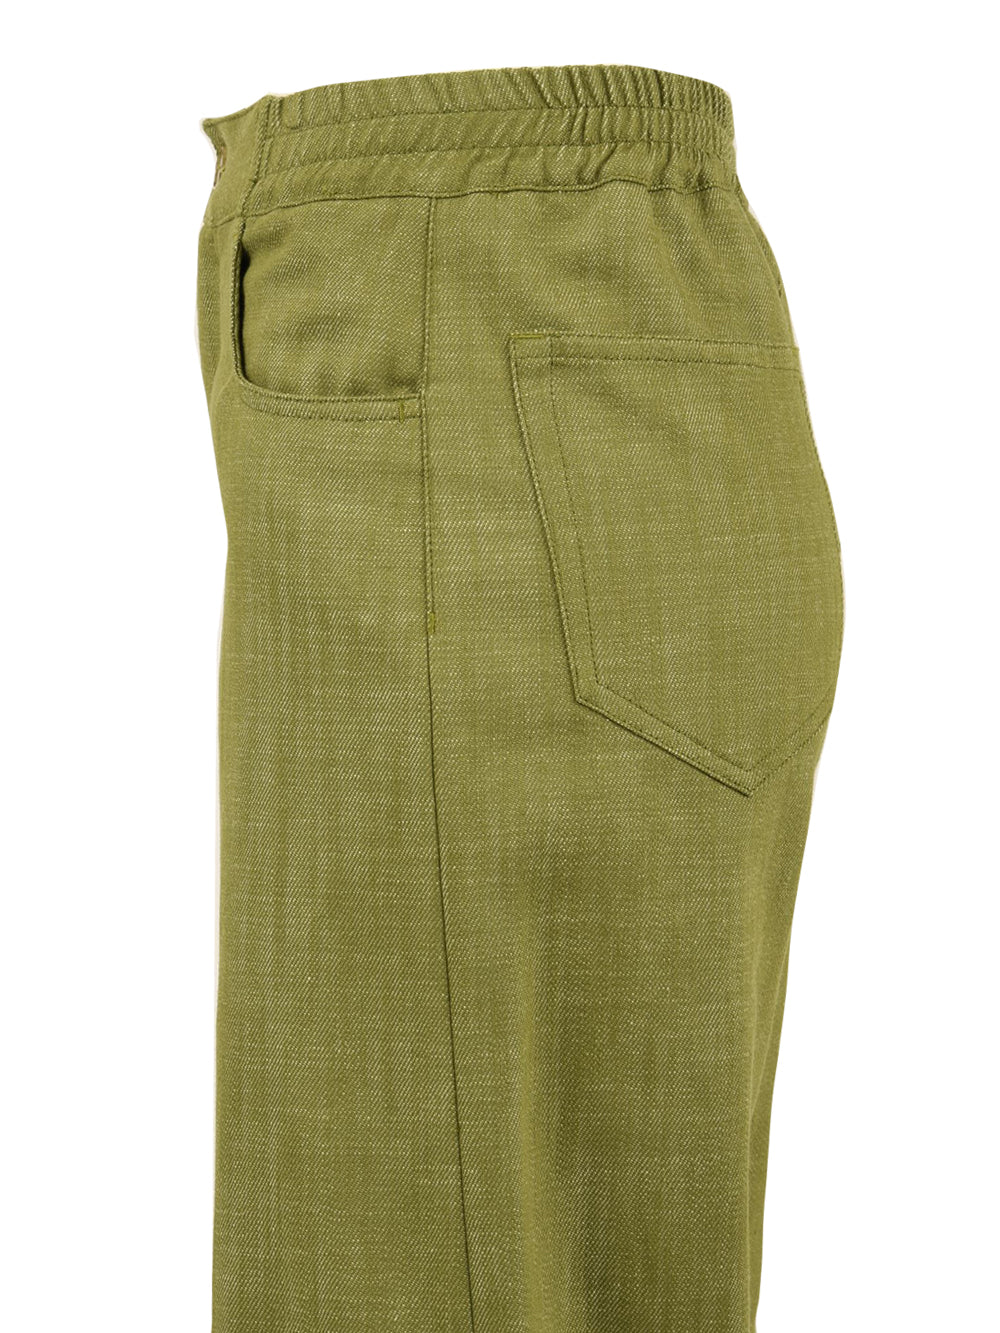 Cortina women's trousers in cotton blend